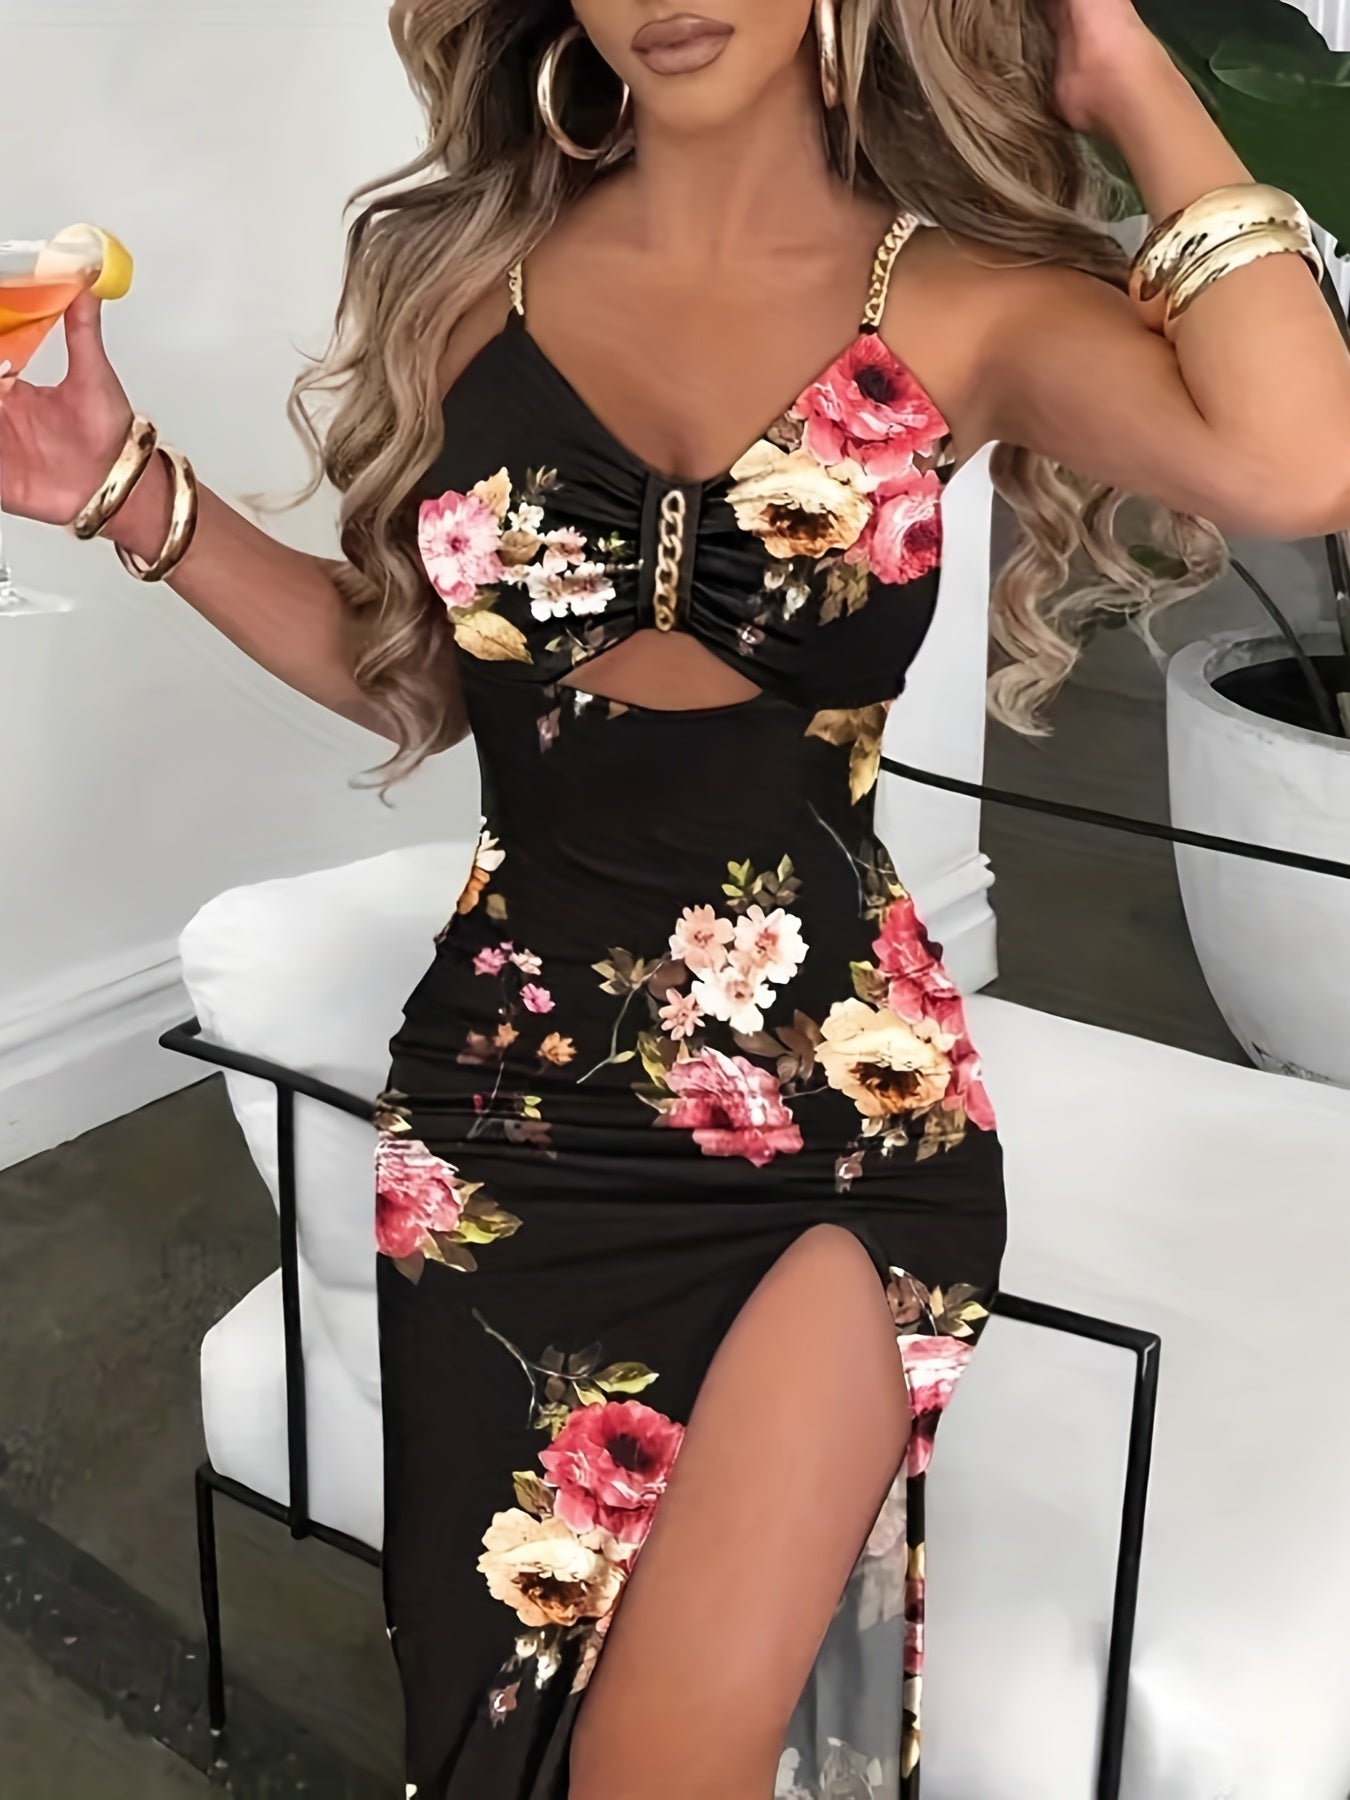 Floral Print Chain Strap Dress, Sexy Cut Out Sleeveless Bodycon Dress, Women's Clothing